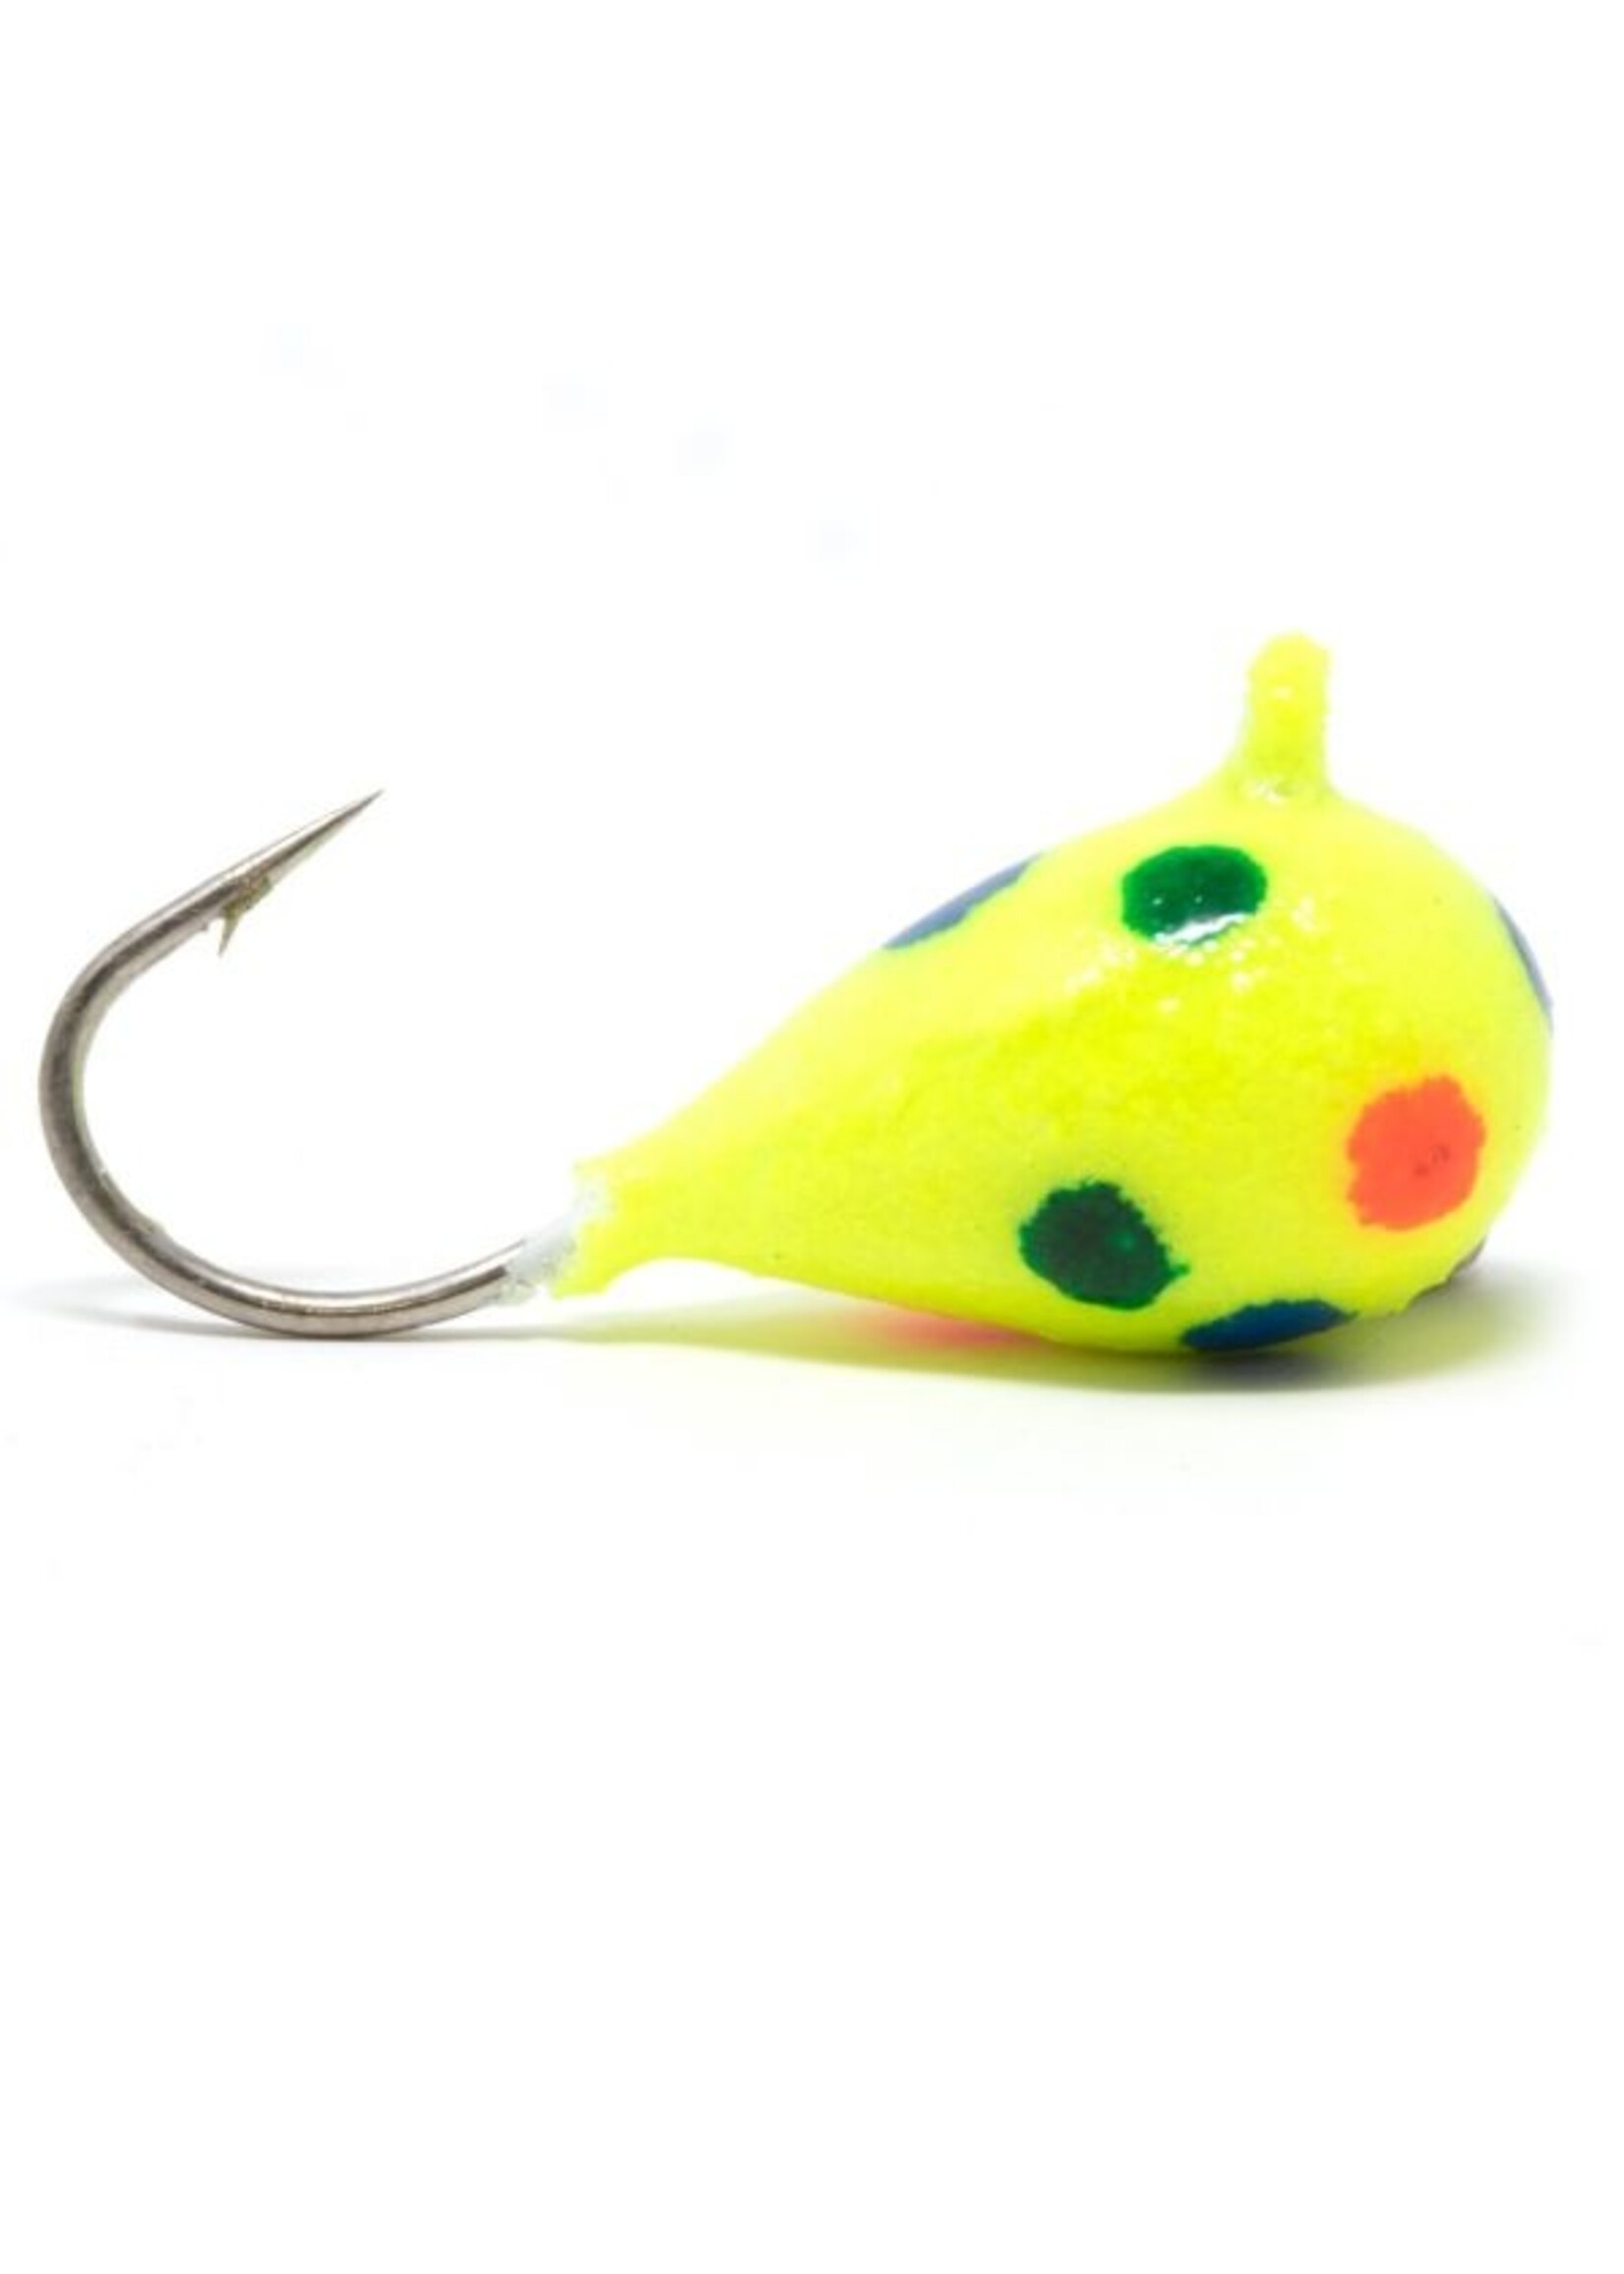 Clam Clam The Drop Tungsten Jig